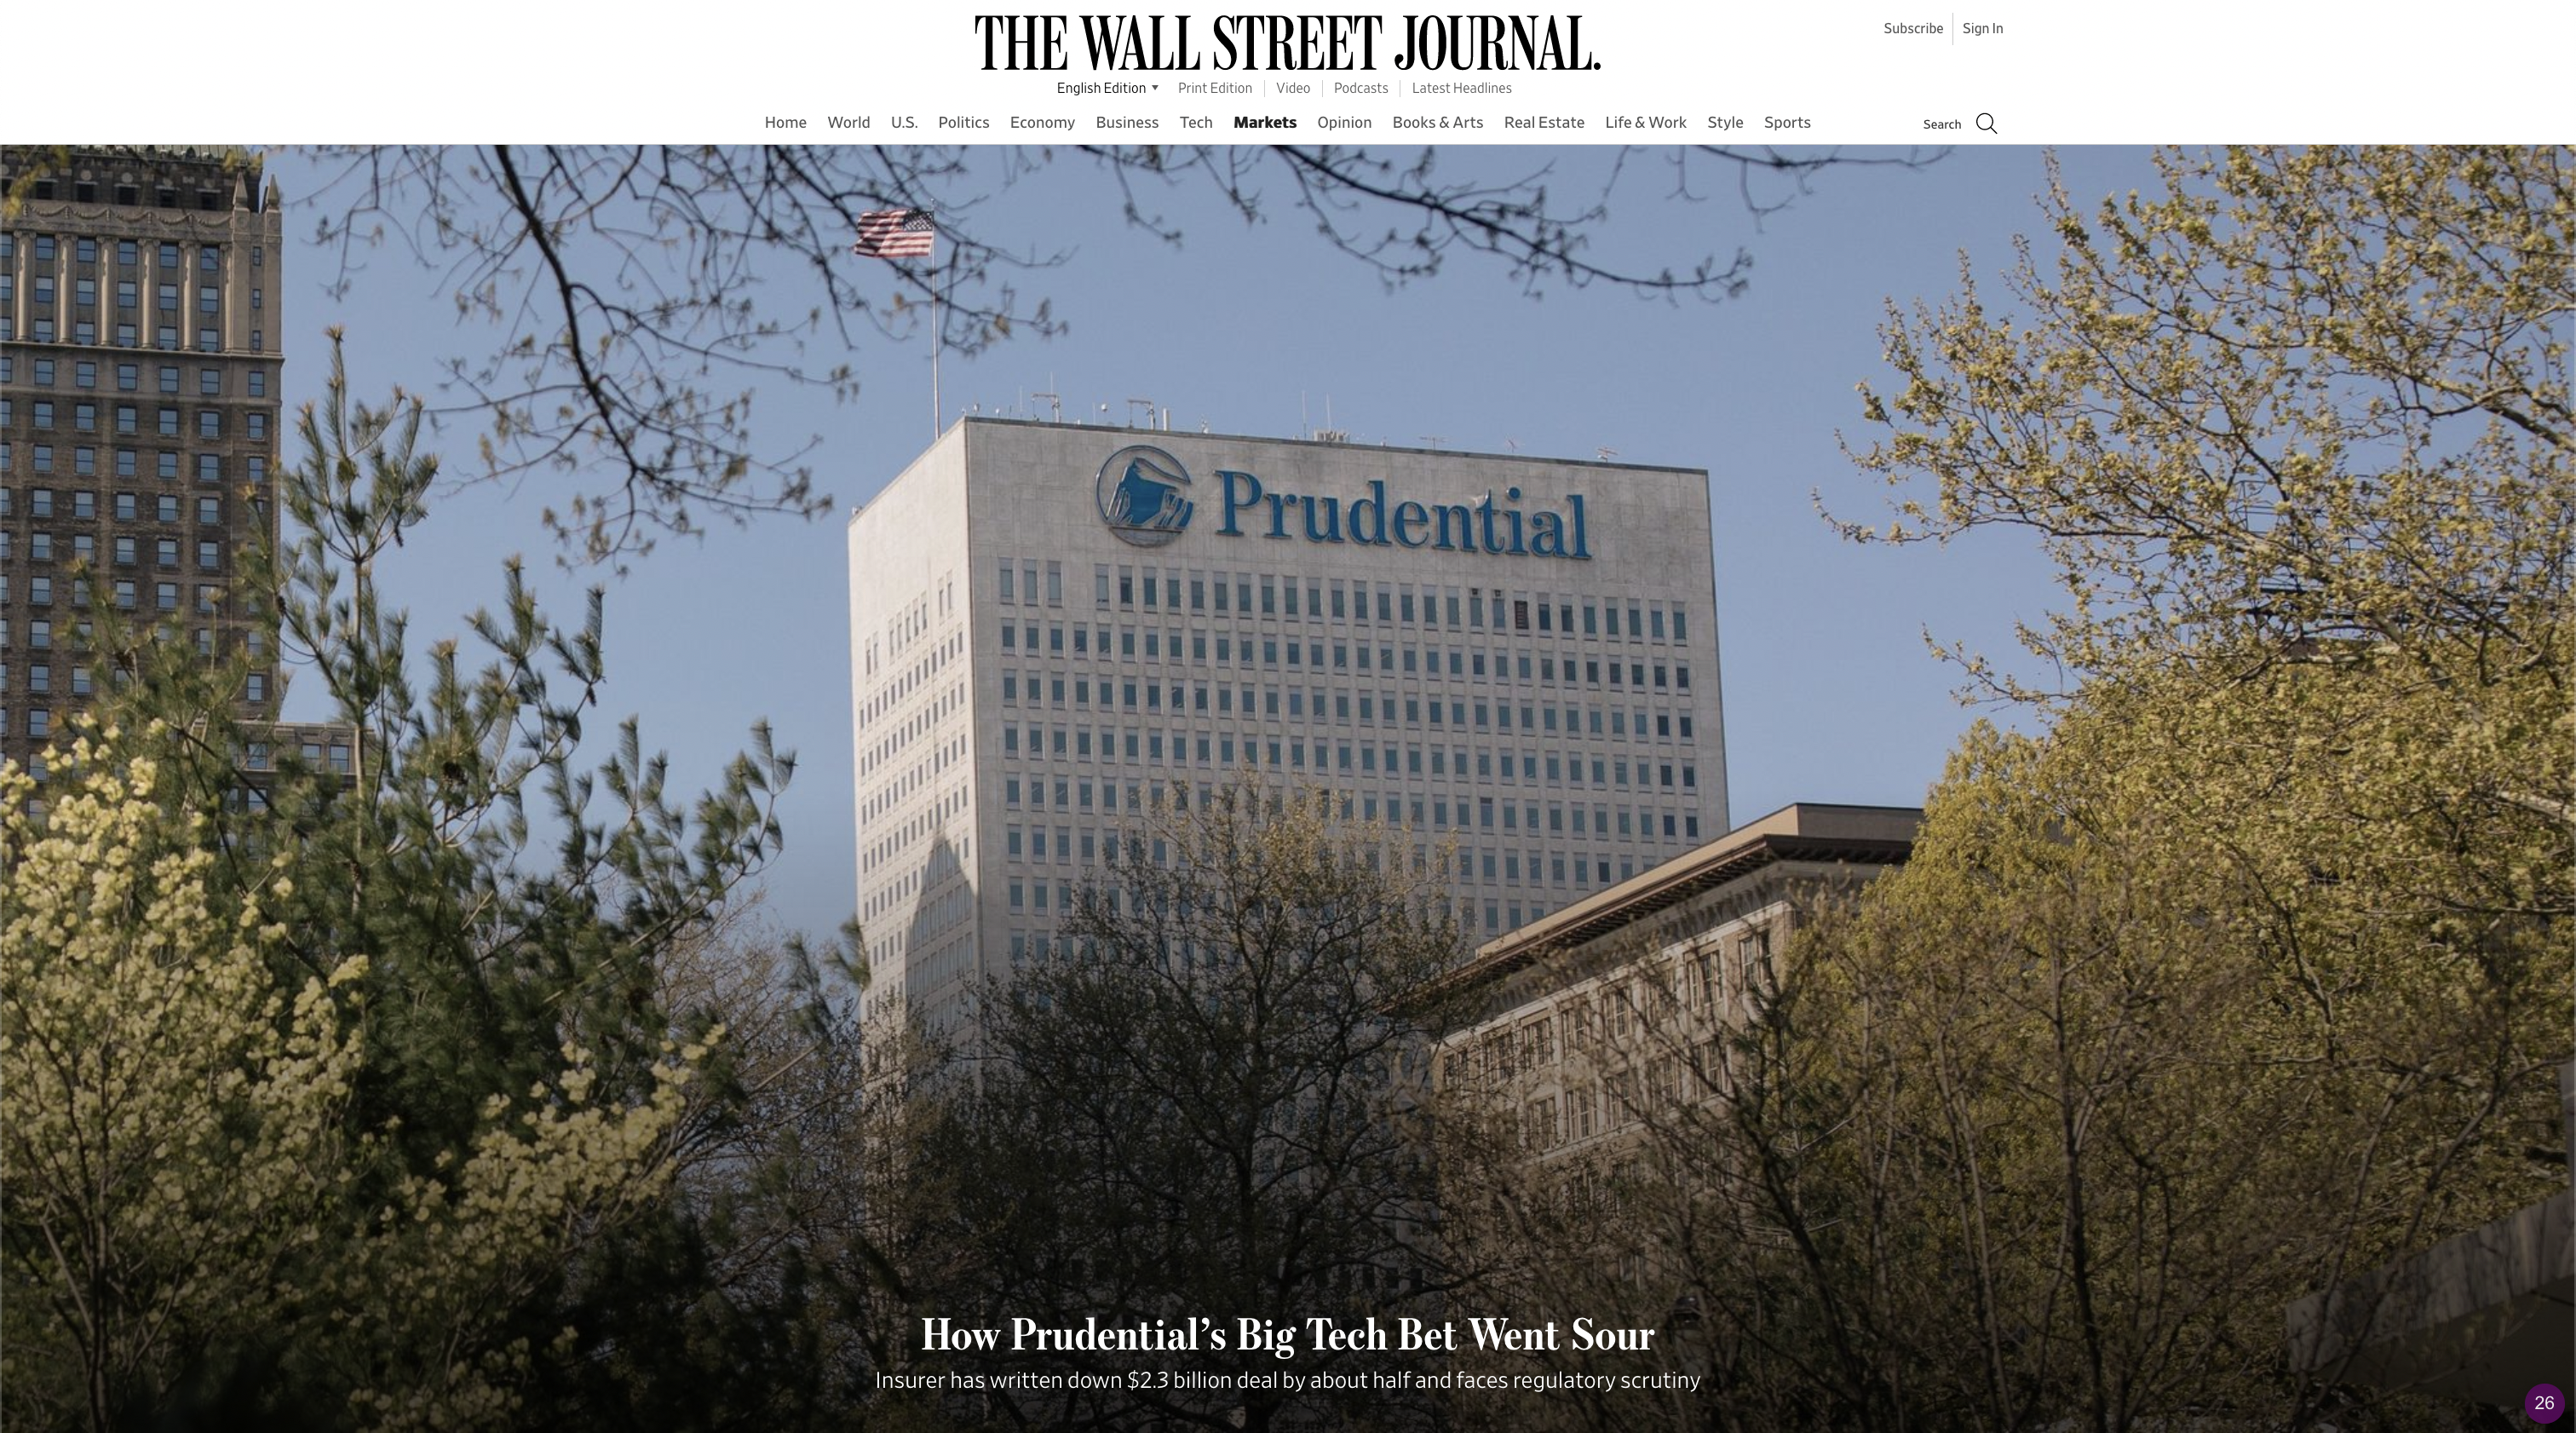 for The Wall Street Journal: How Prudential’s Big Tech Bet Went Sour